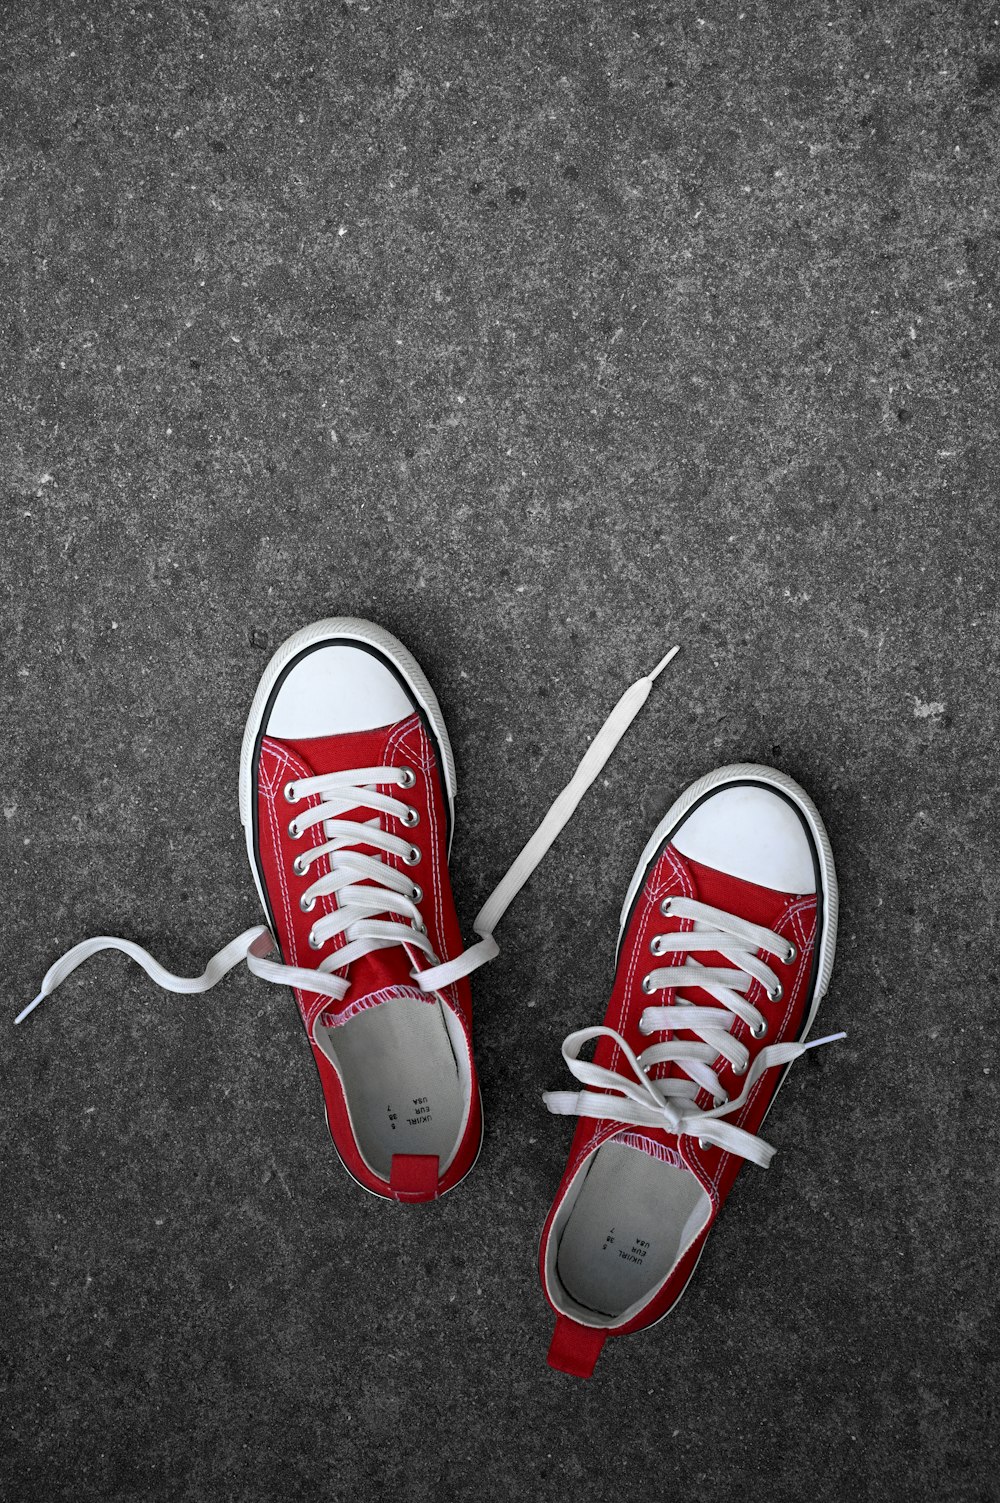 a pair of red sneakers with white laces